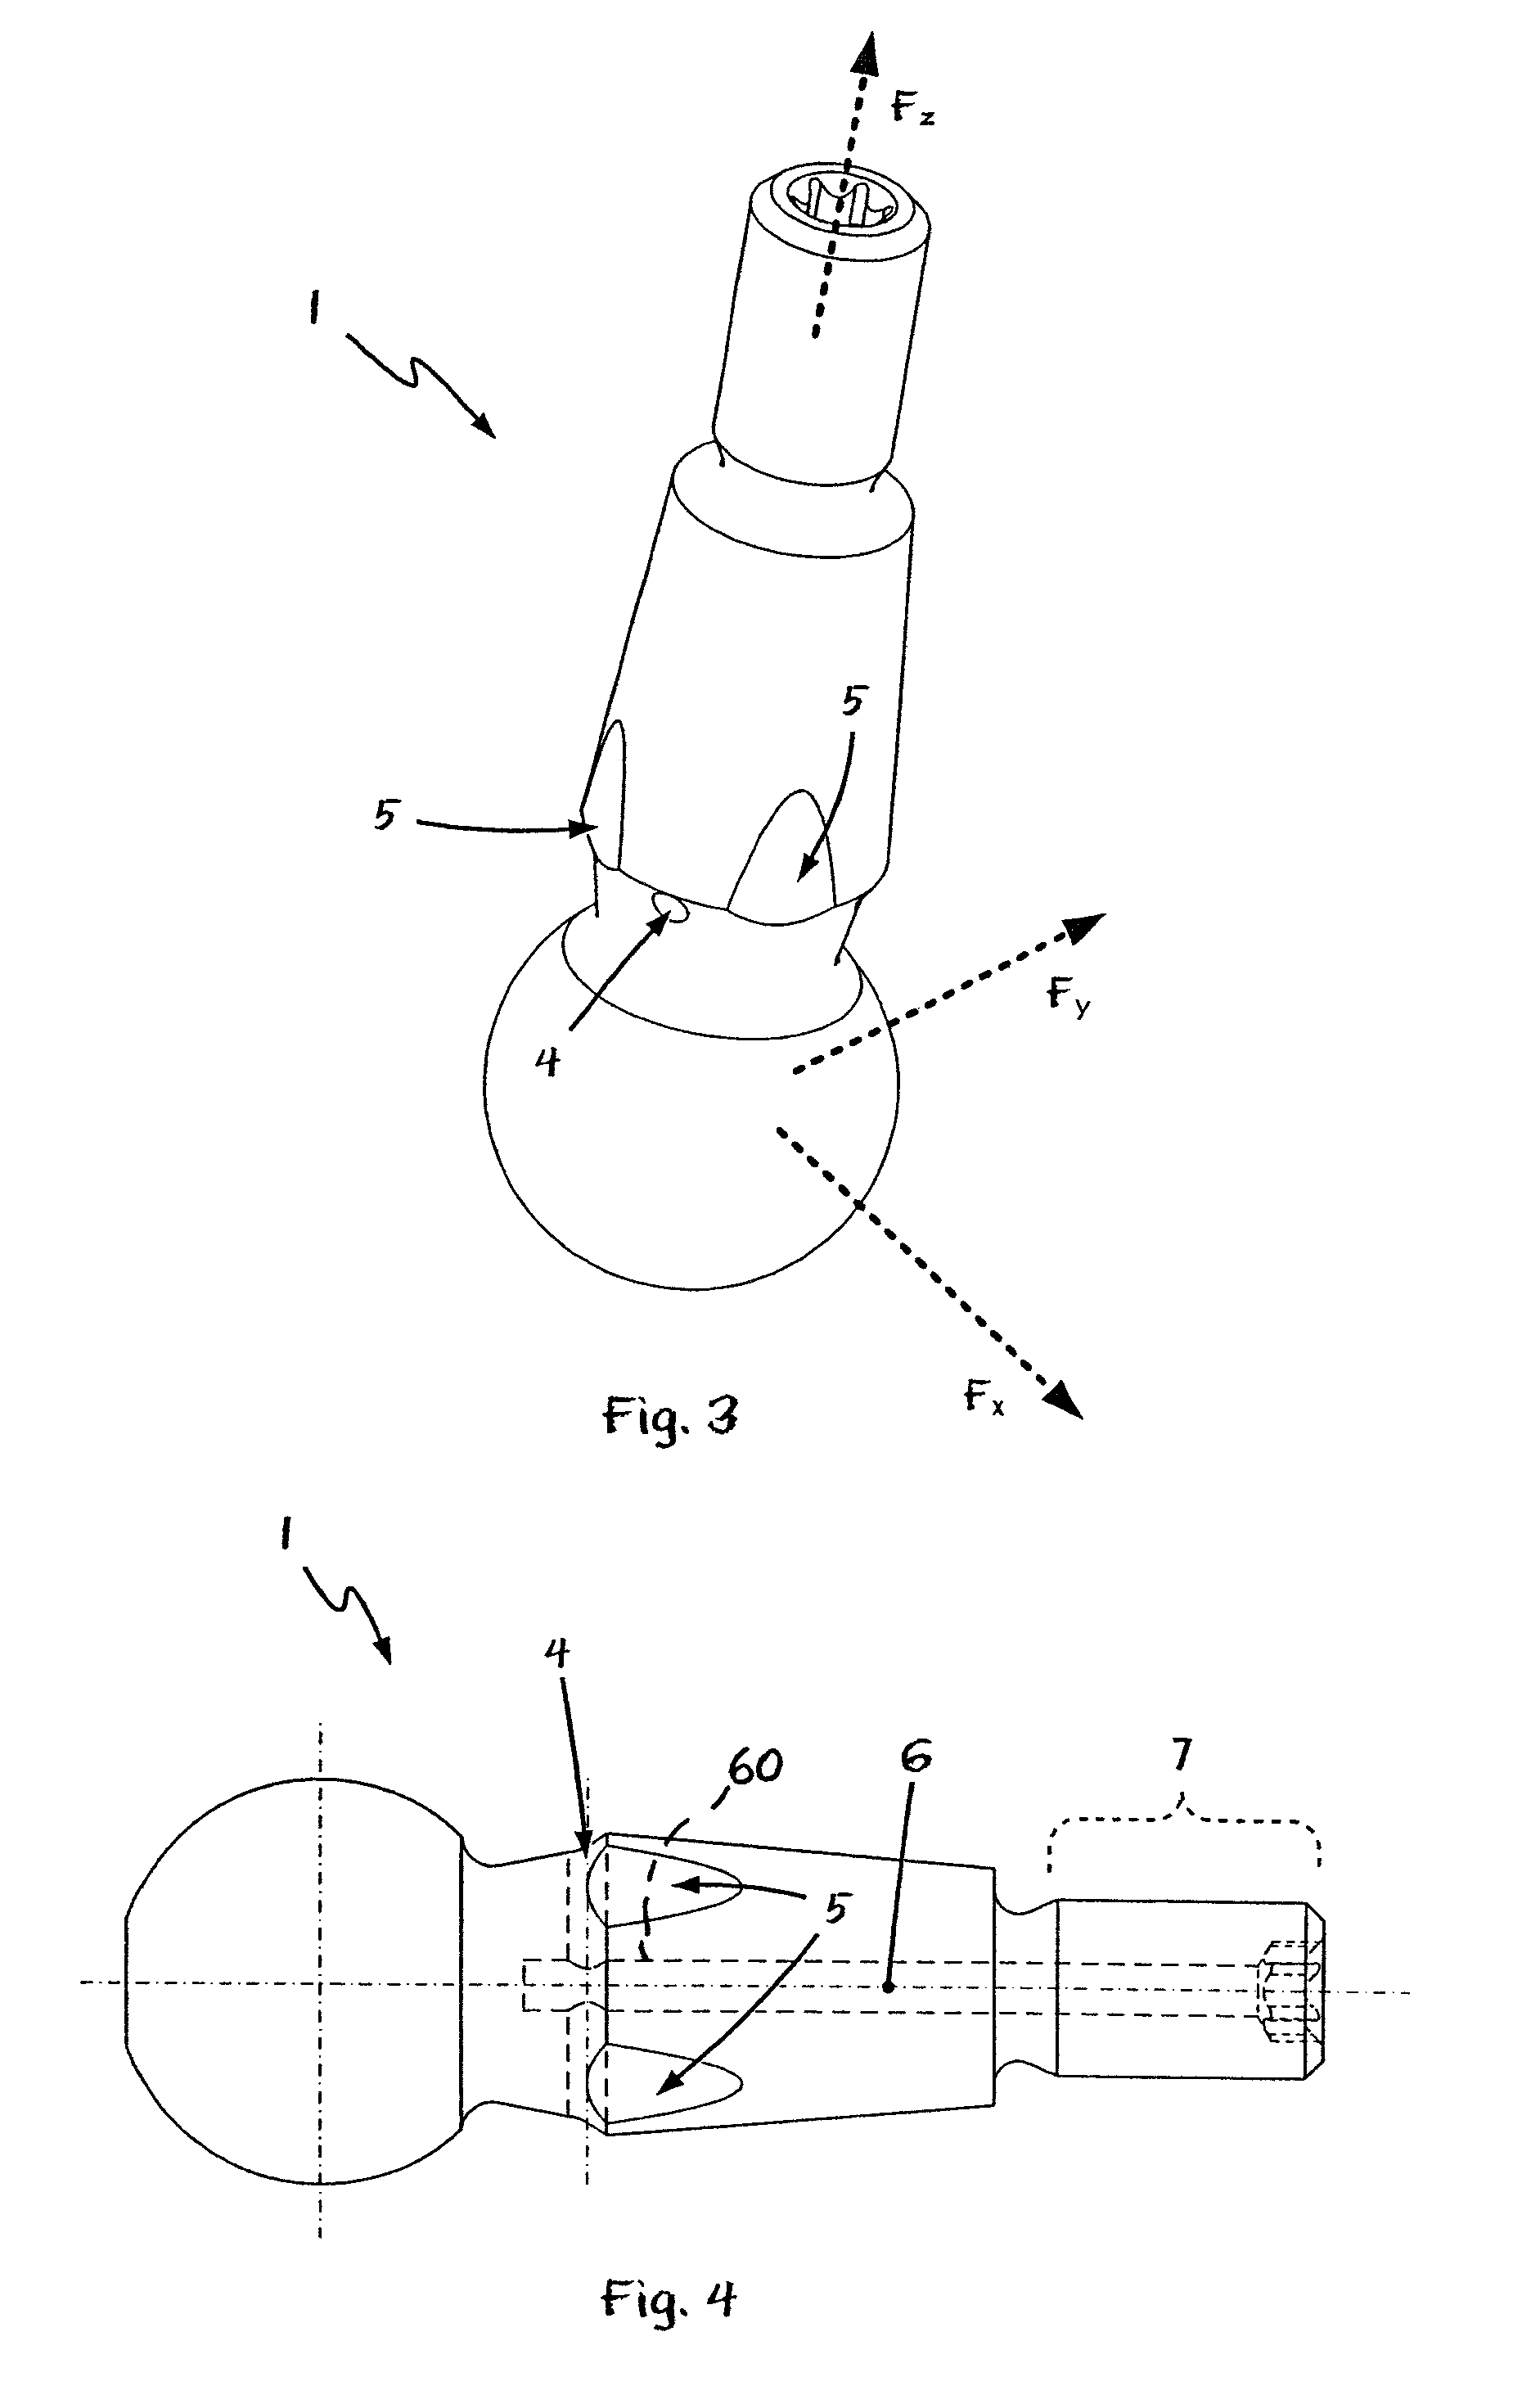 Load-sensing system with at least one ball and socket joint